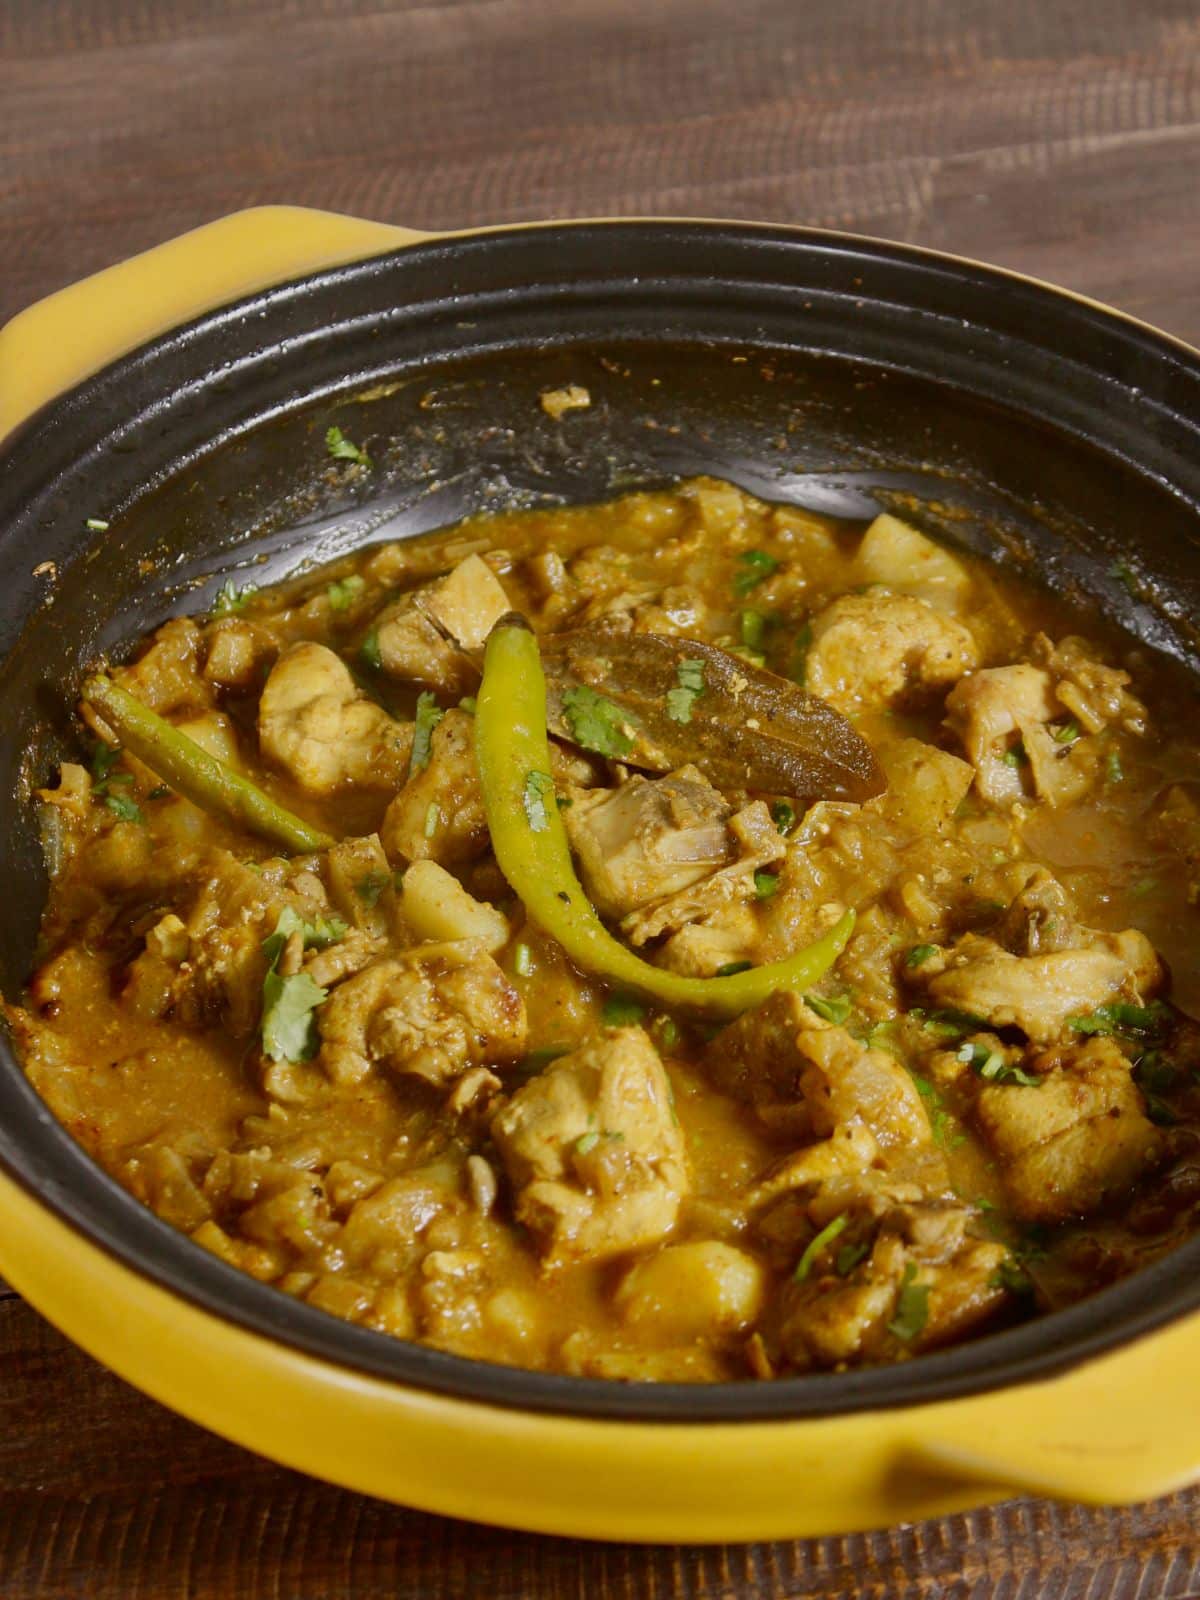 serve hot and spicy banana stem chicken curry with rice or roti and enjoy 